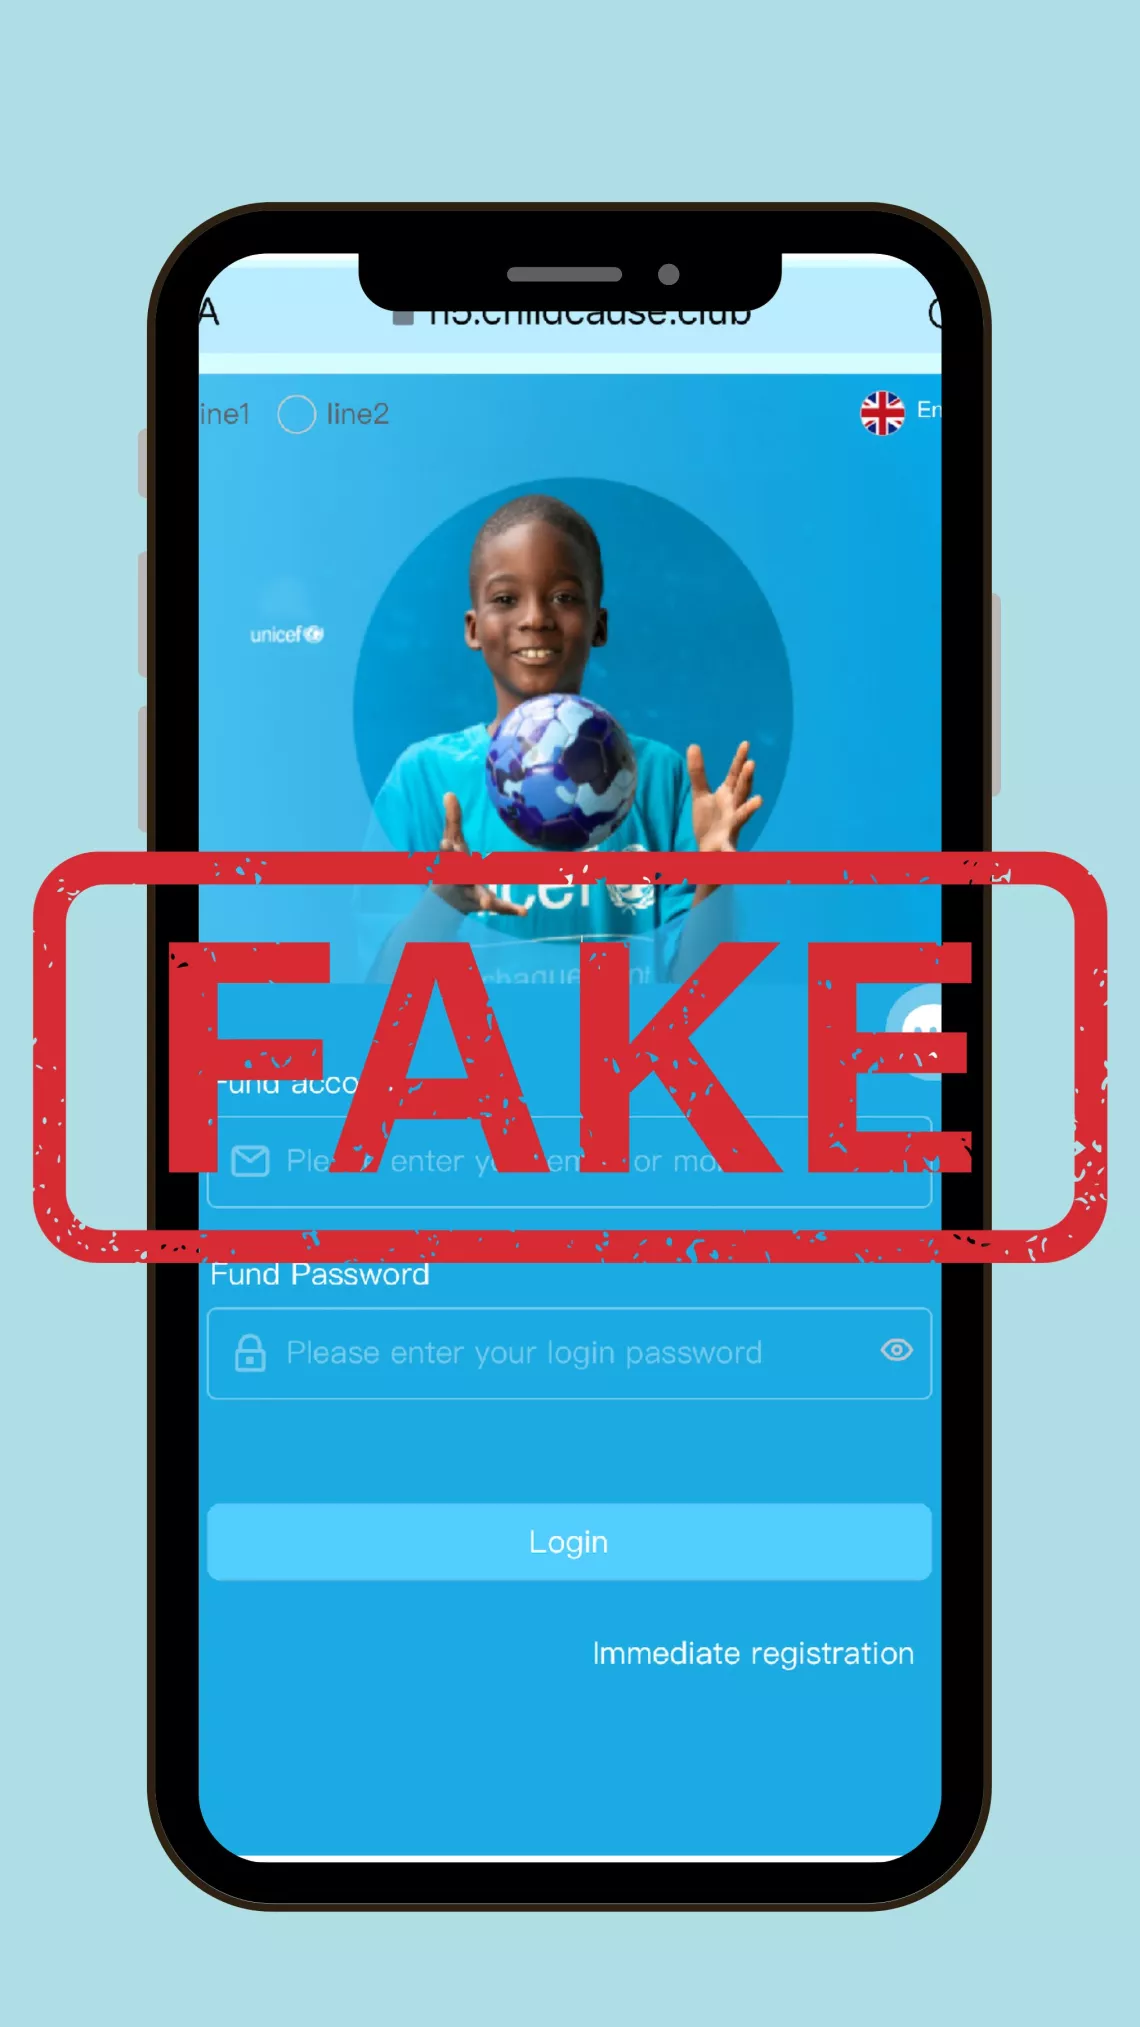 Beware of scams and false messages on social networks